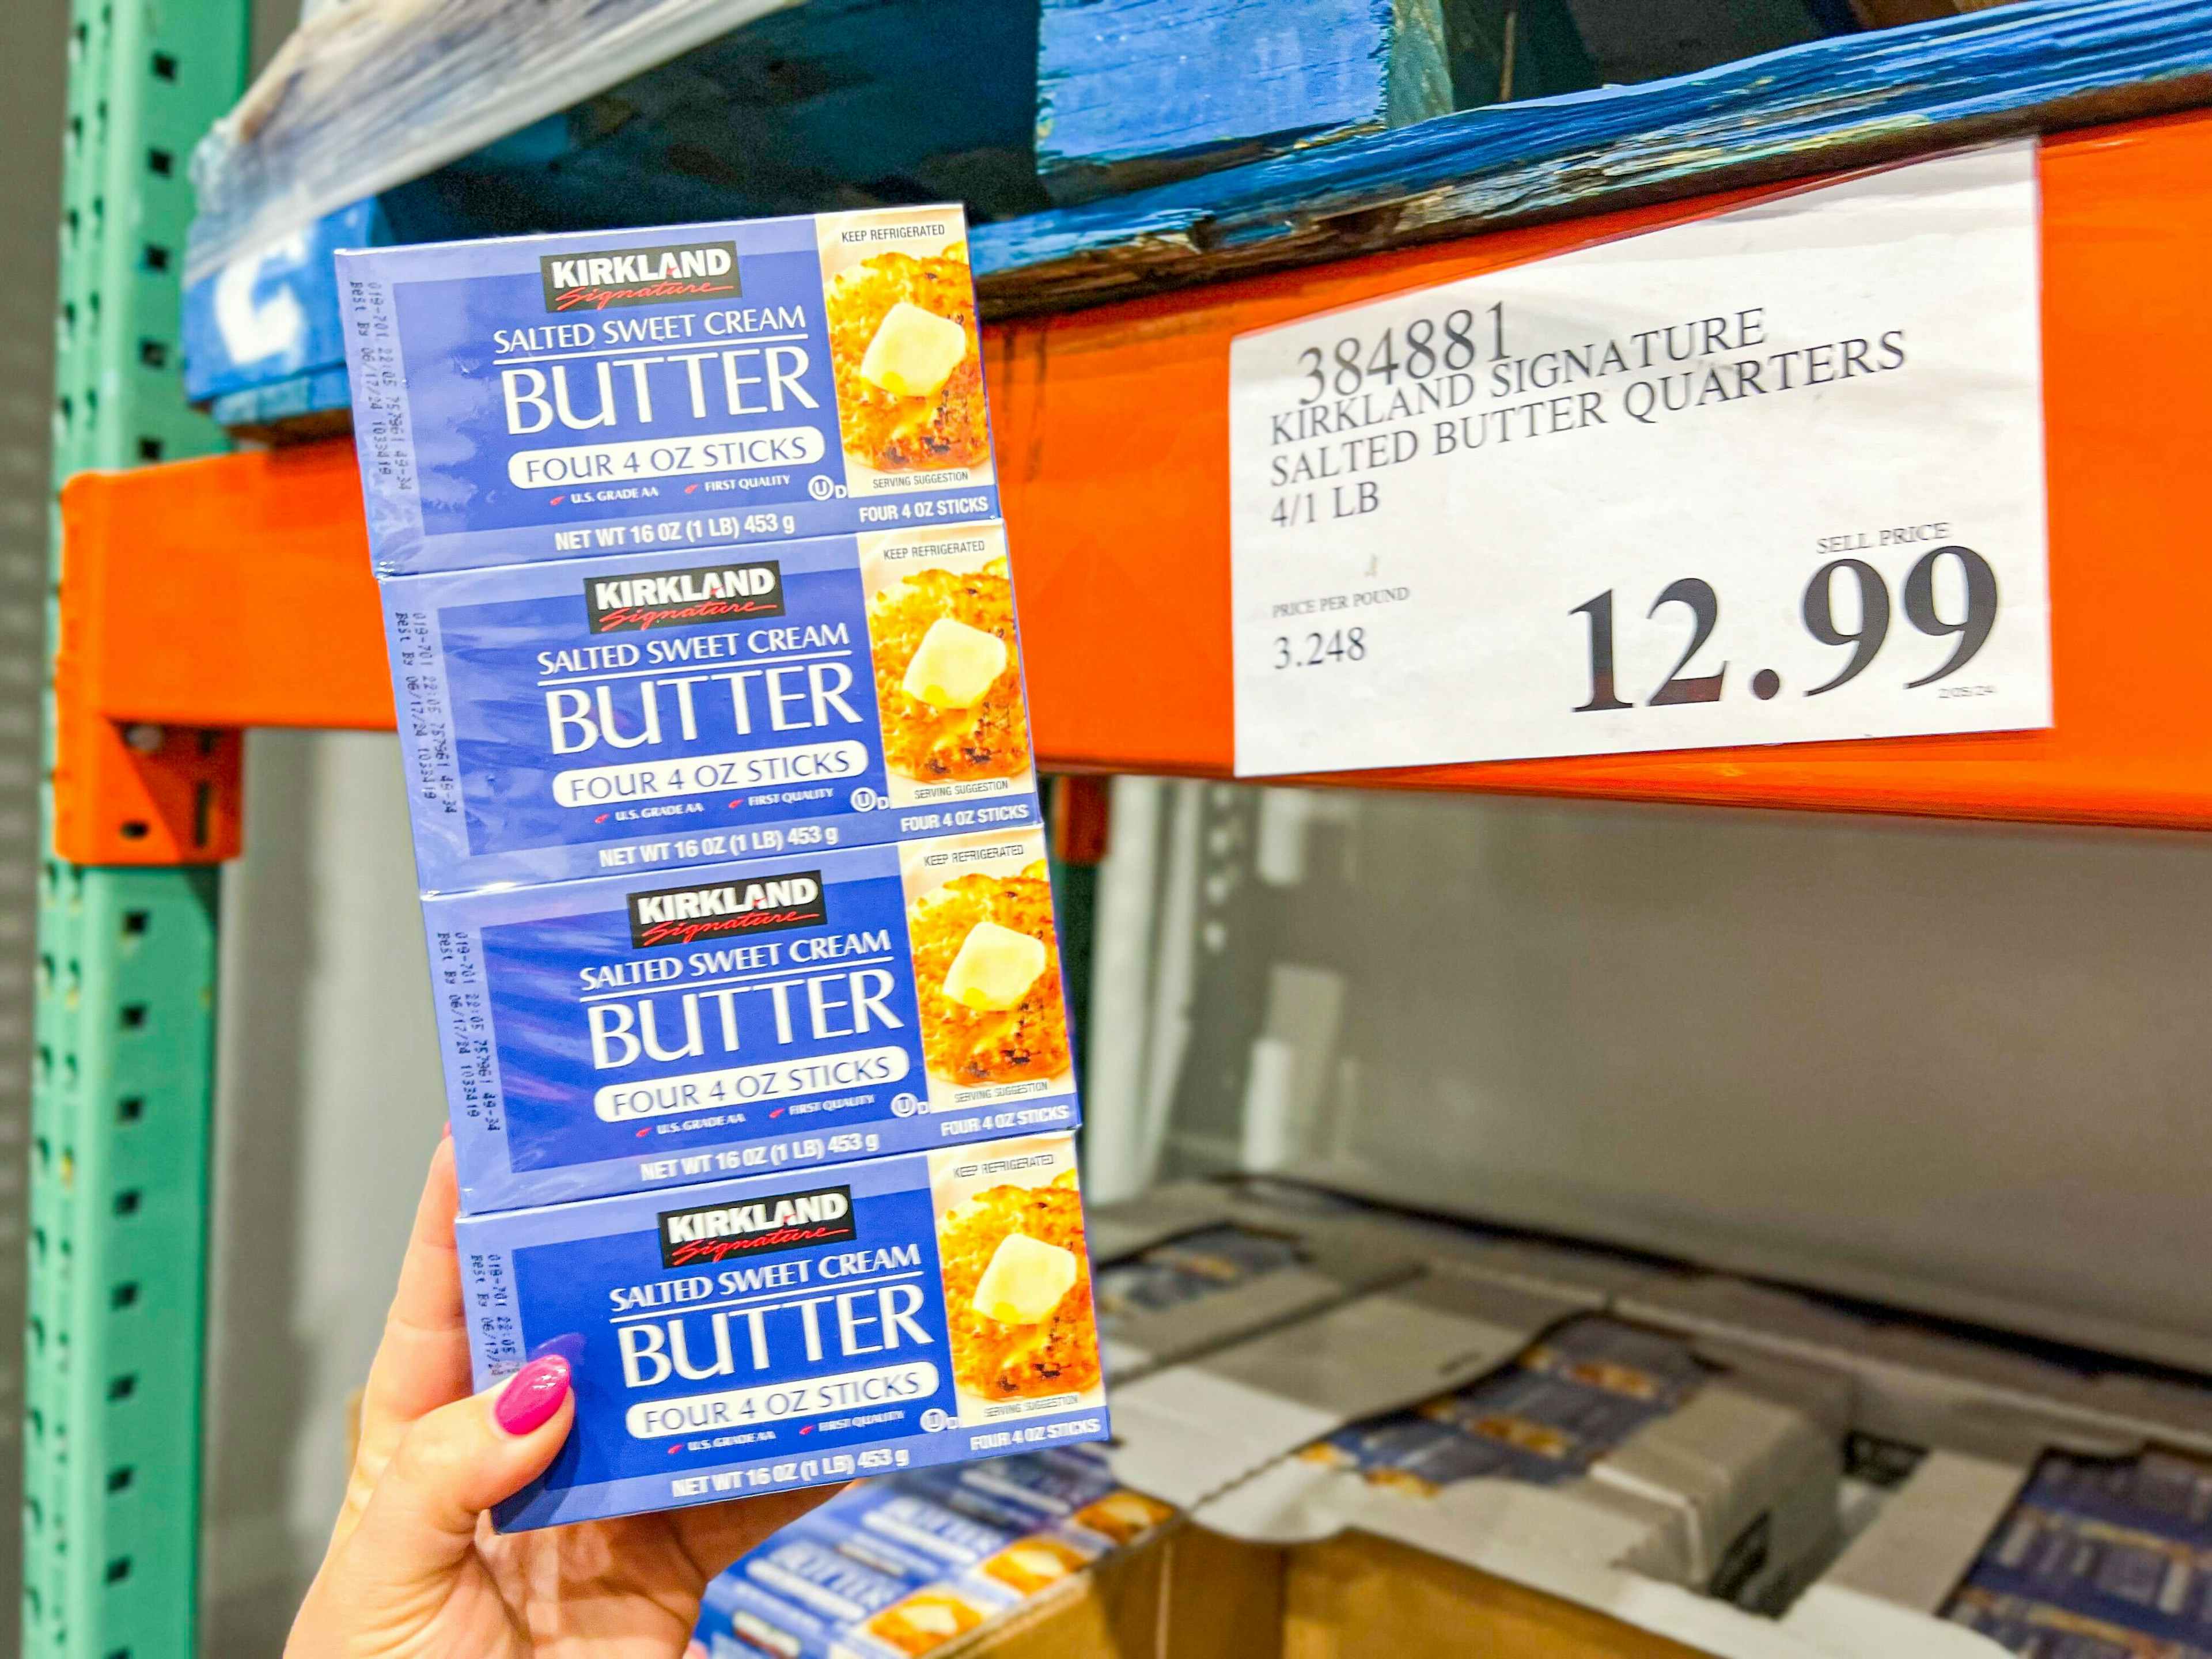 costco-prices-going-down-kirkland-butter-4pk-kcl-2